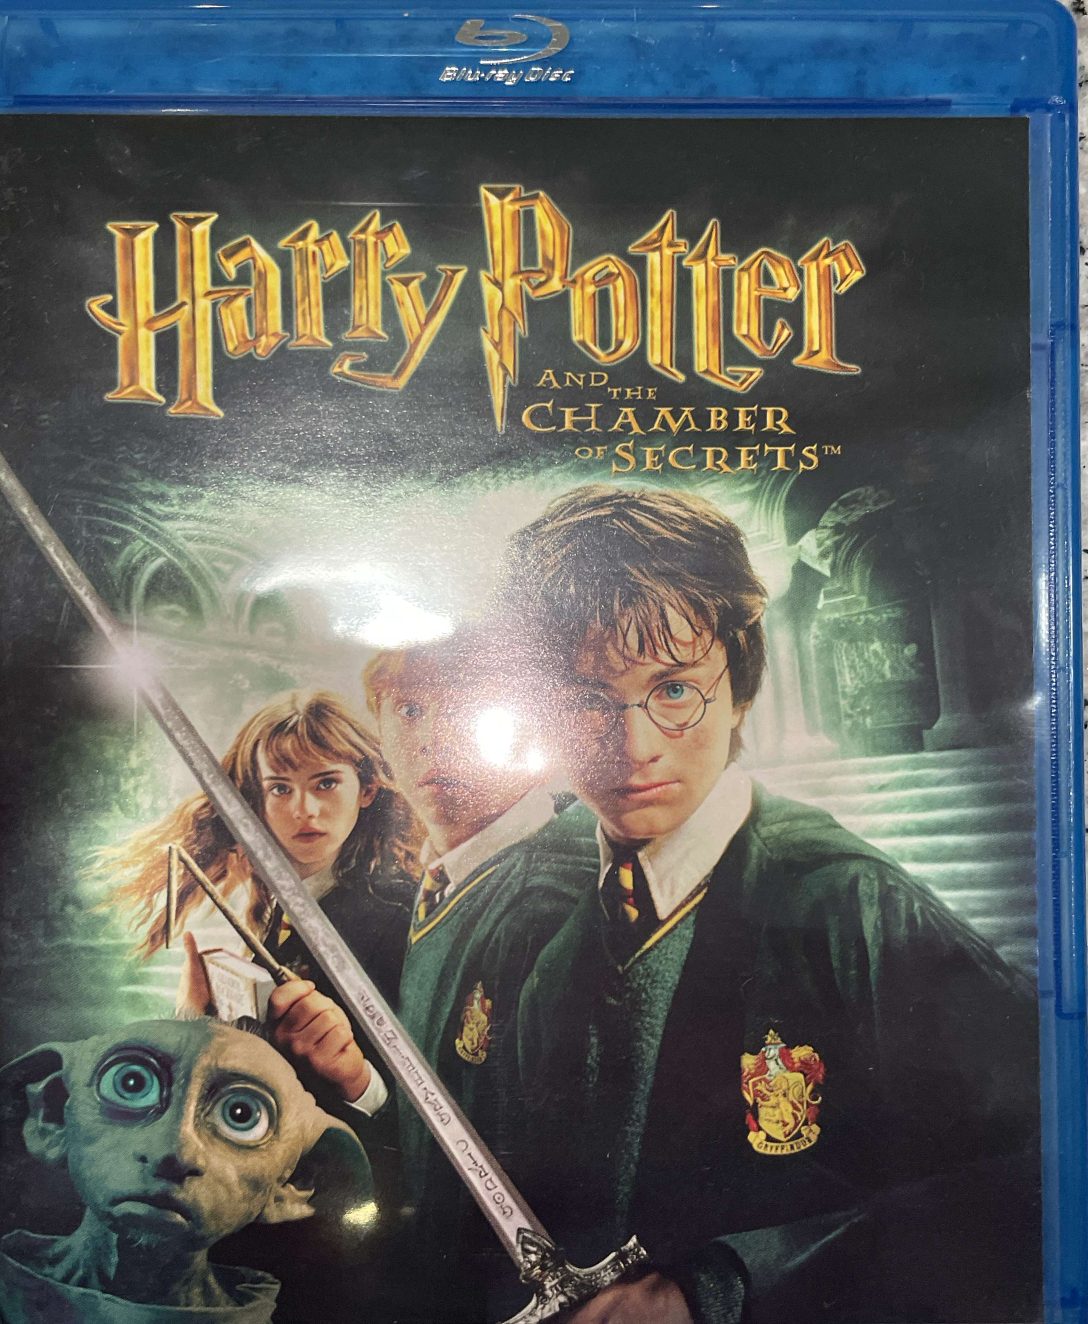 MOVIE REVIEW: Harry Potter and the Chamber of Secrets